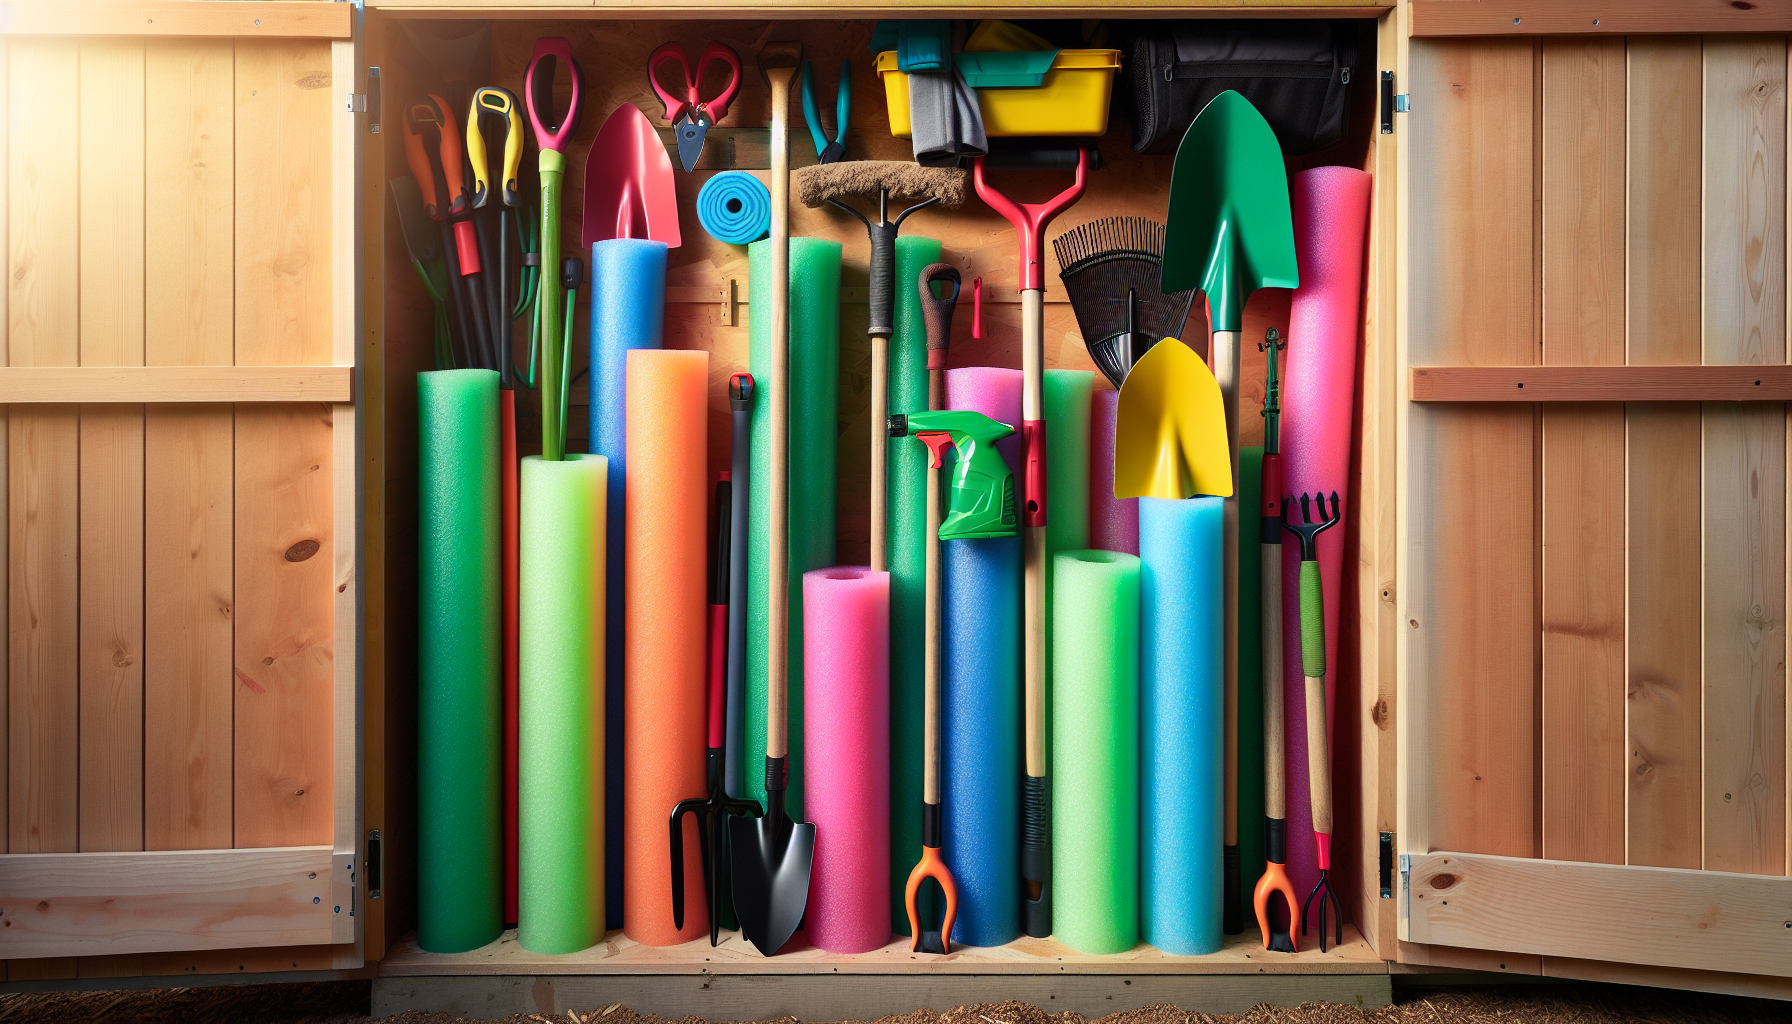 Using pool noodles for safe and organized garden tool storage: an innovative, cost-effective solution